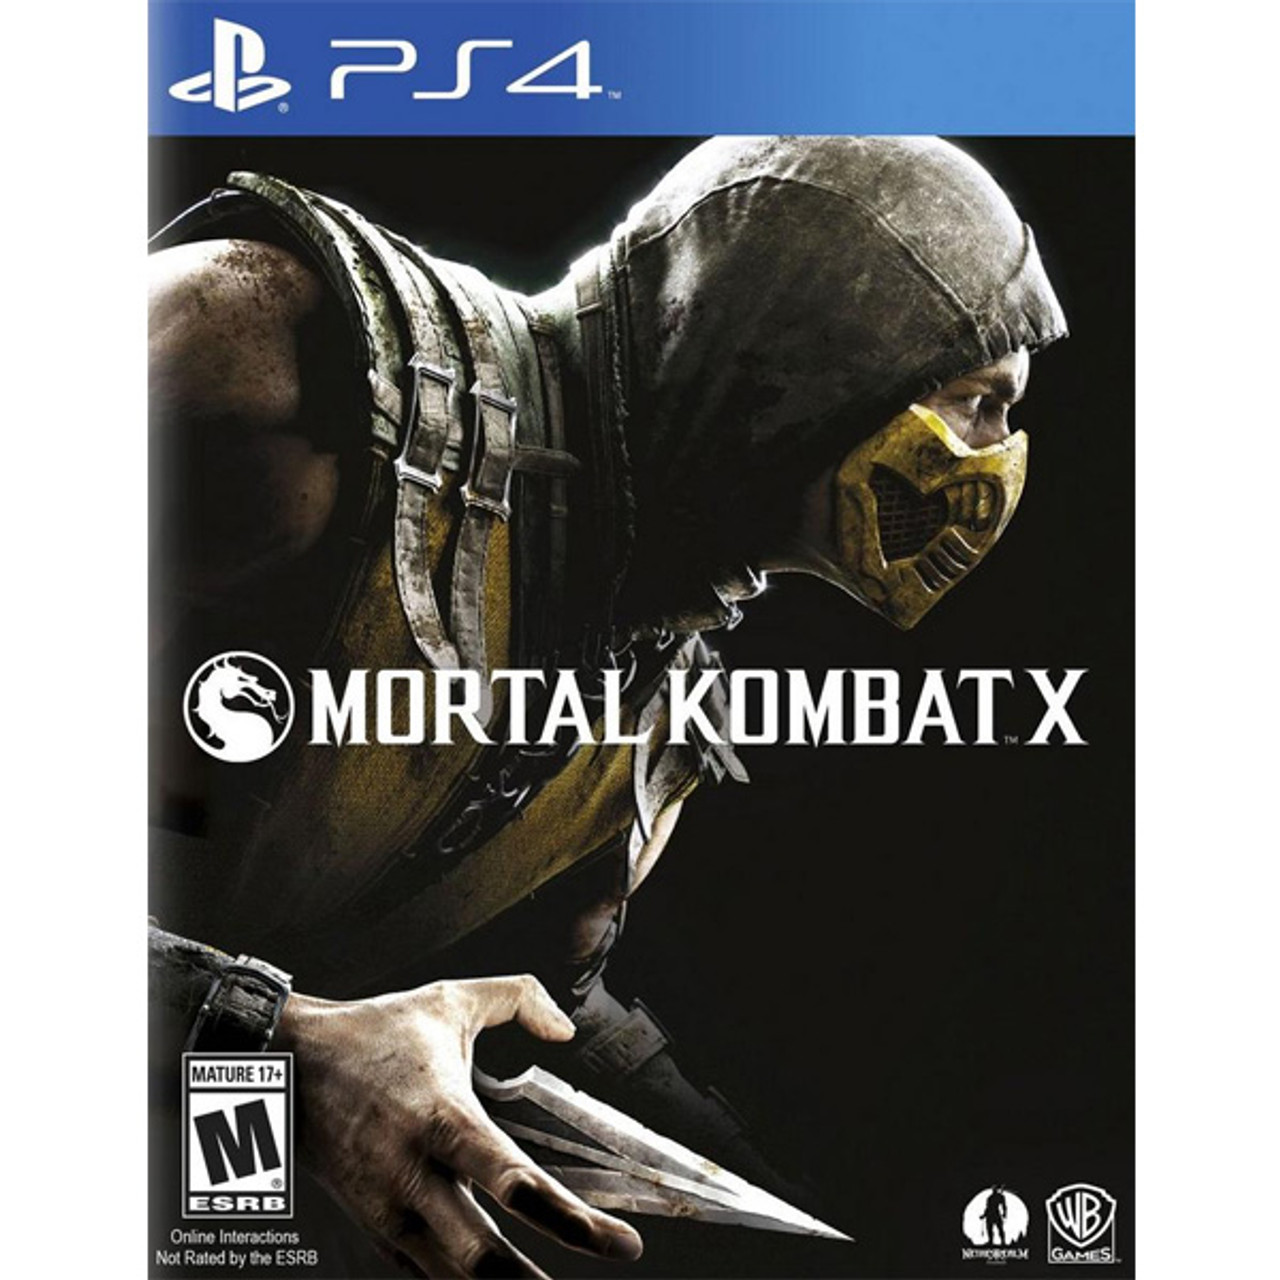 Mortal Kombat, Cover Art Only (NO GAME/MANUAL/CASE!), XBOX 360